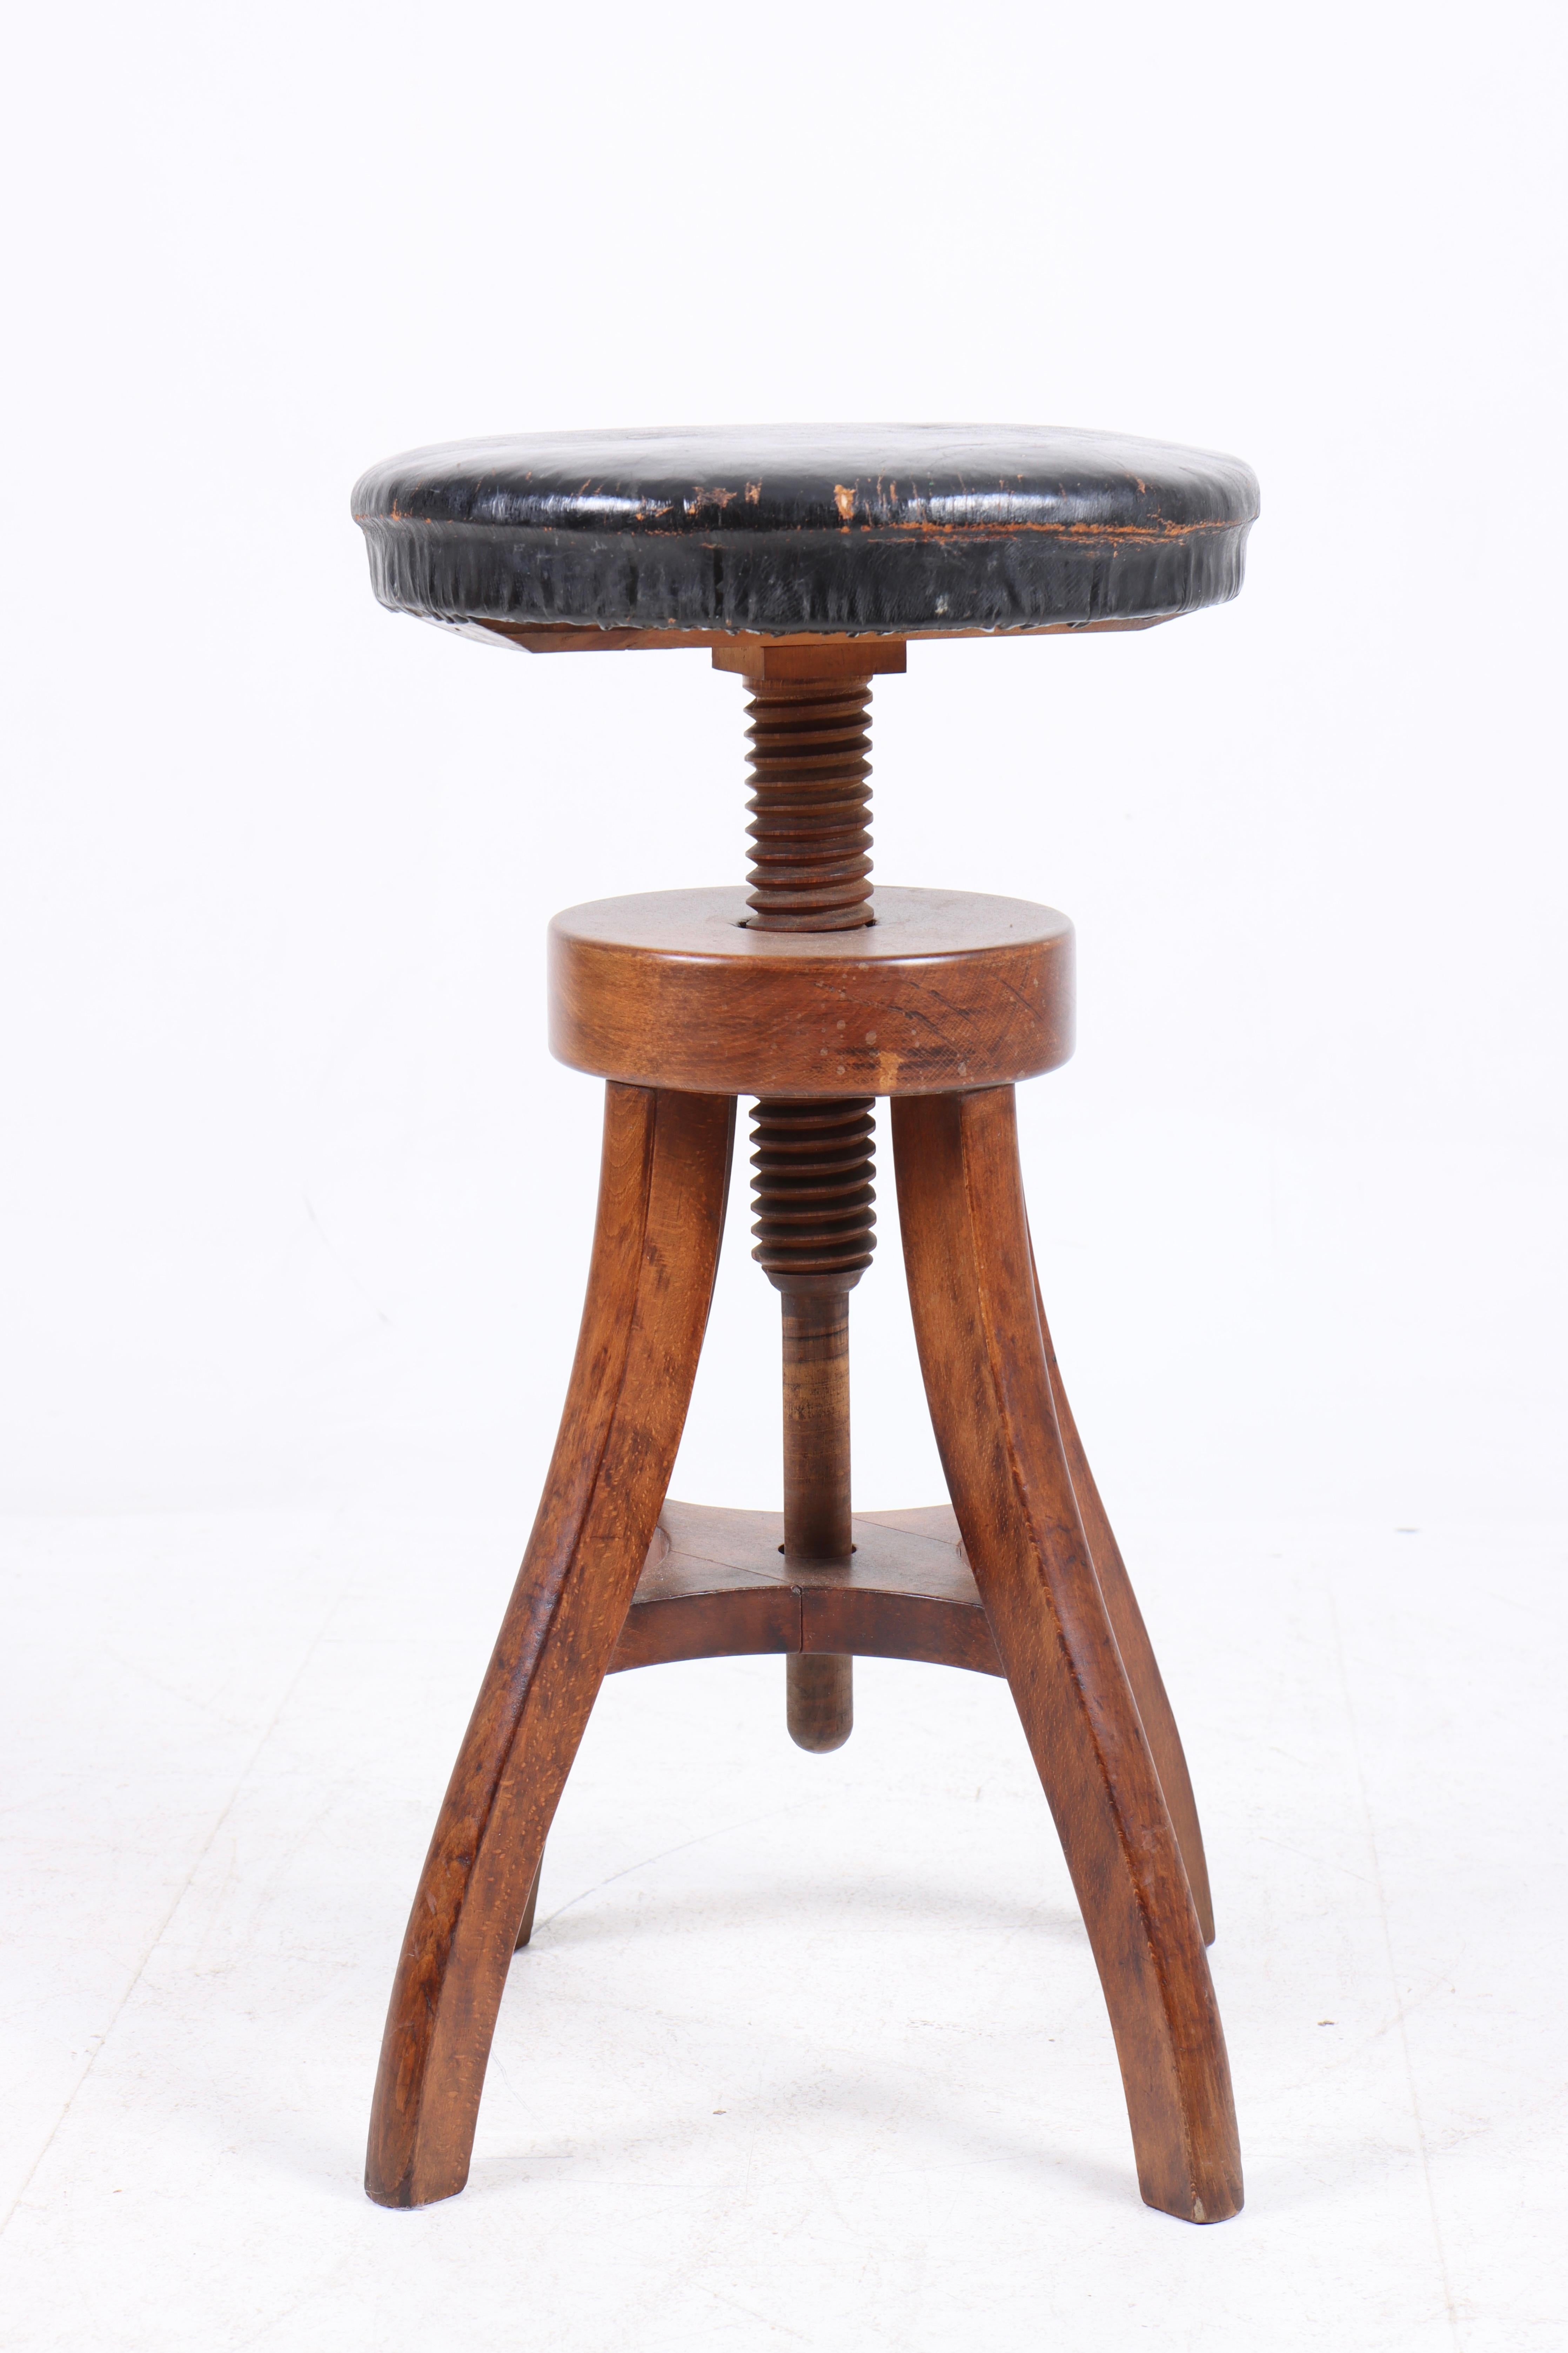 Artist stool in oak and patinated leather, designed and made in Denmark. Original condition.